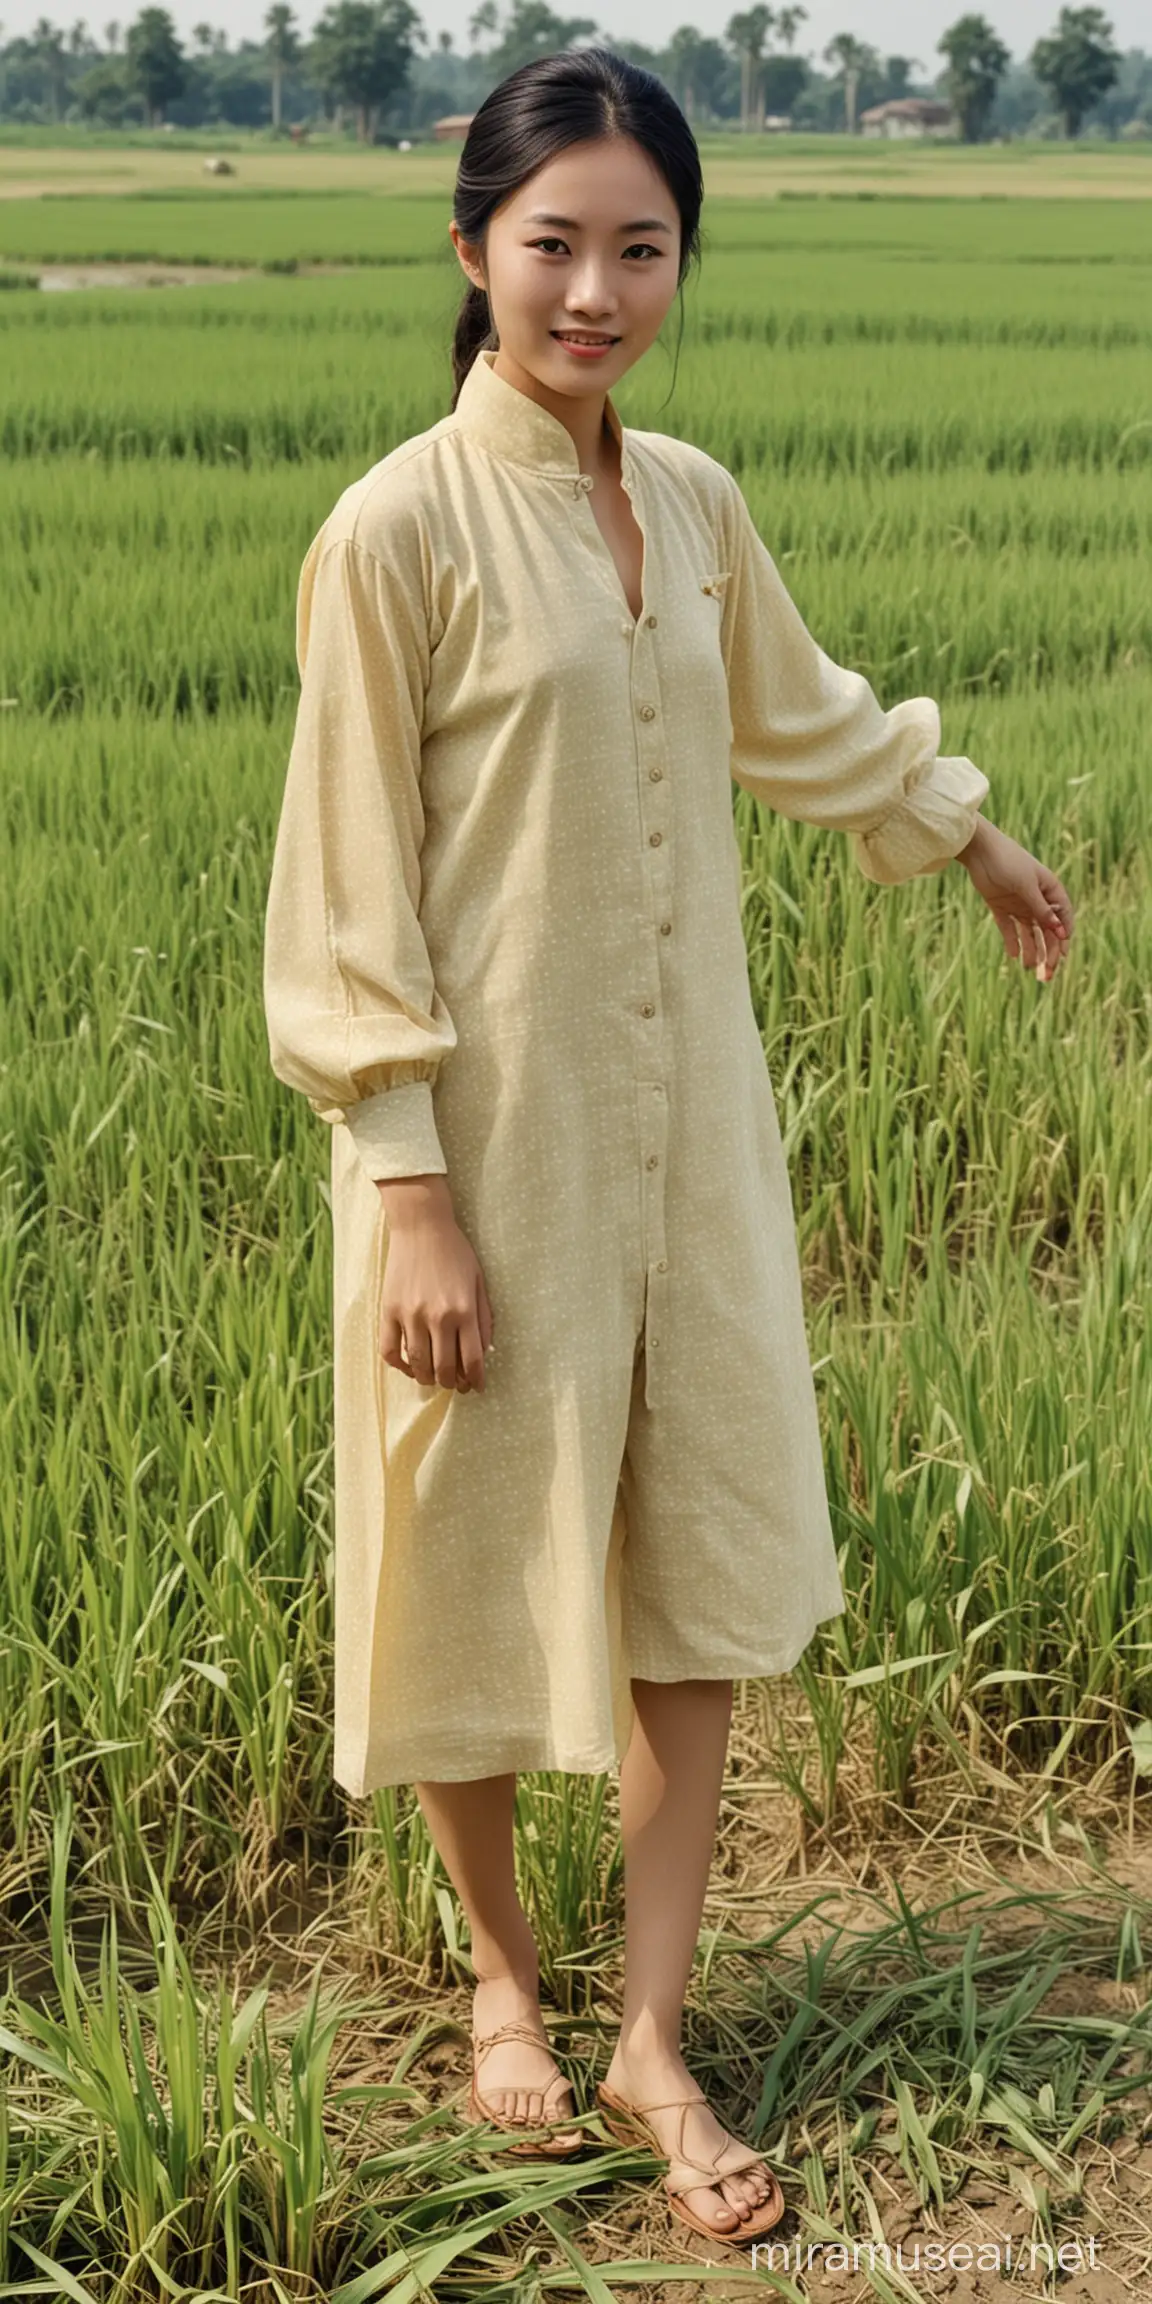 Vintage Portrait Lin Qingxia in 1970s Rural Paddy Field